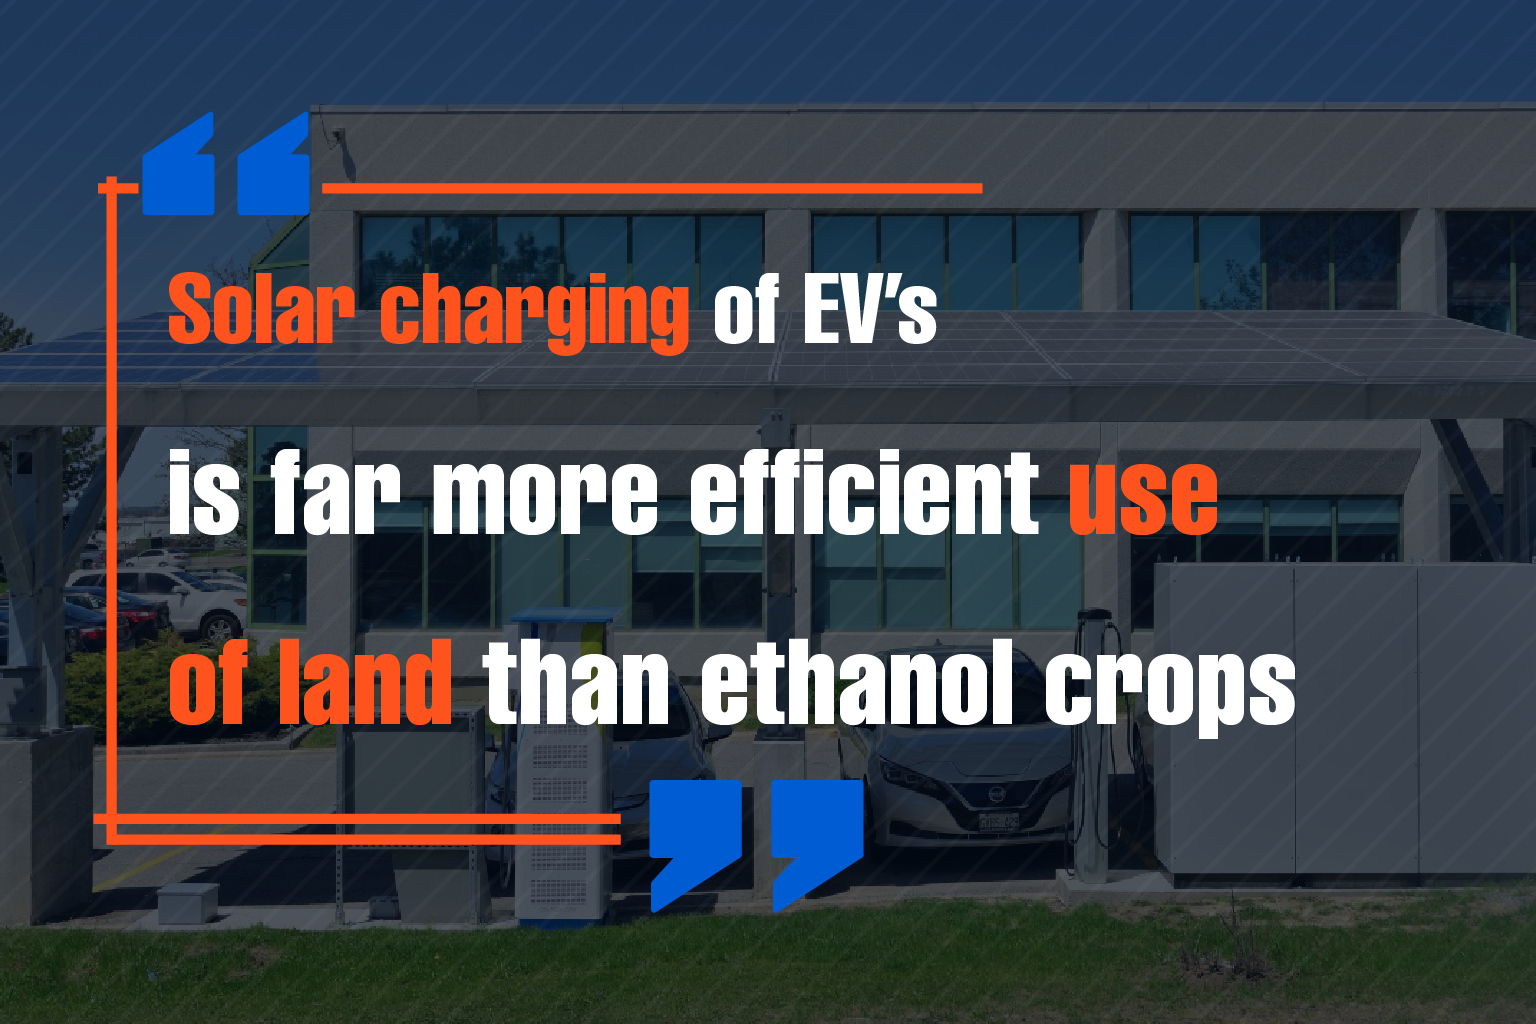 Solar charging of EV’s is far more efficient use of land than ethanol crops